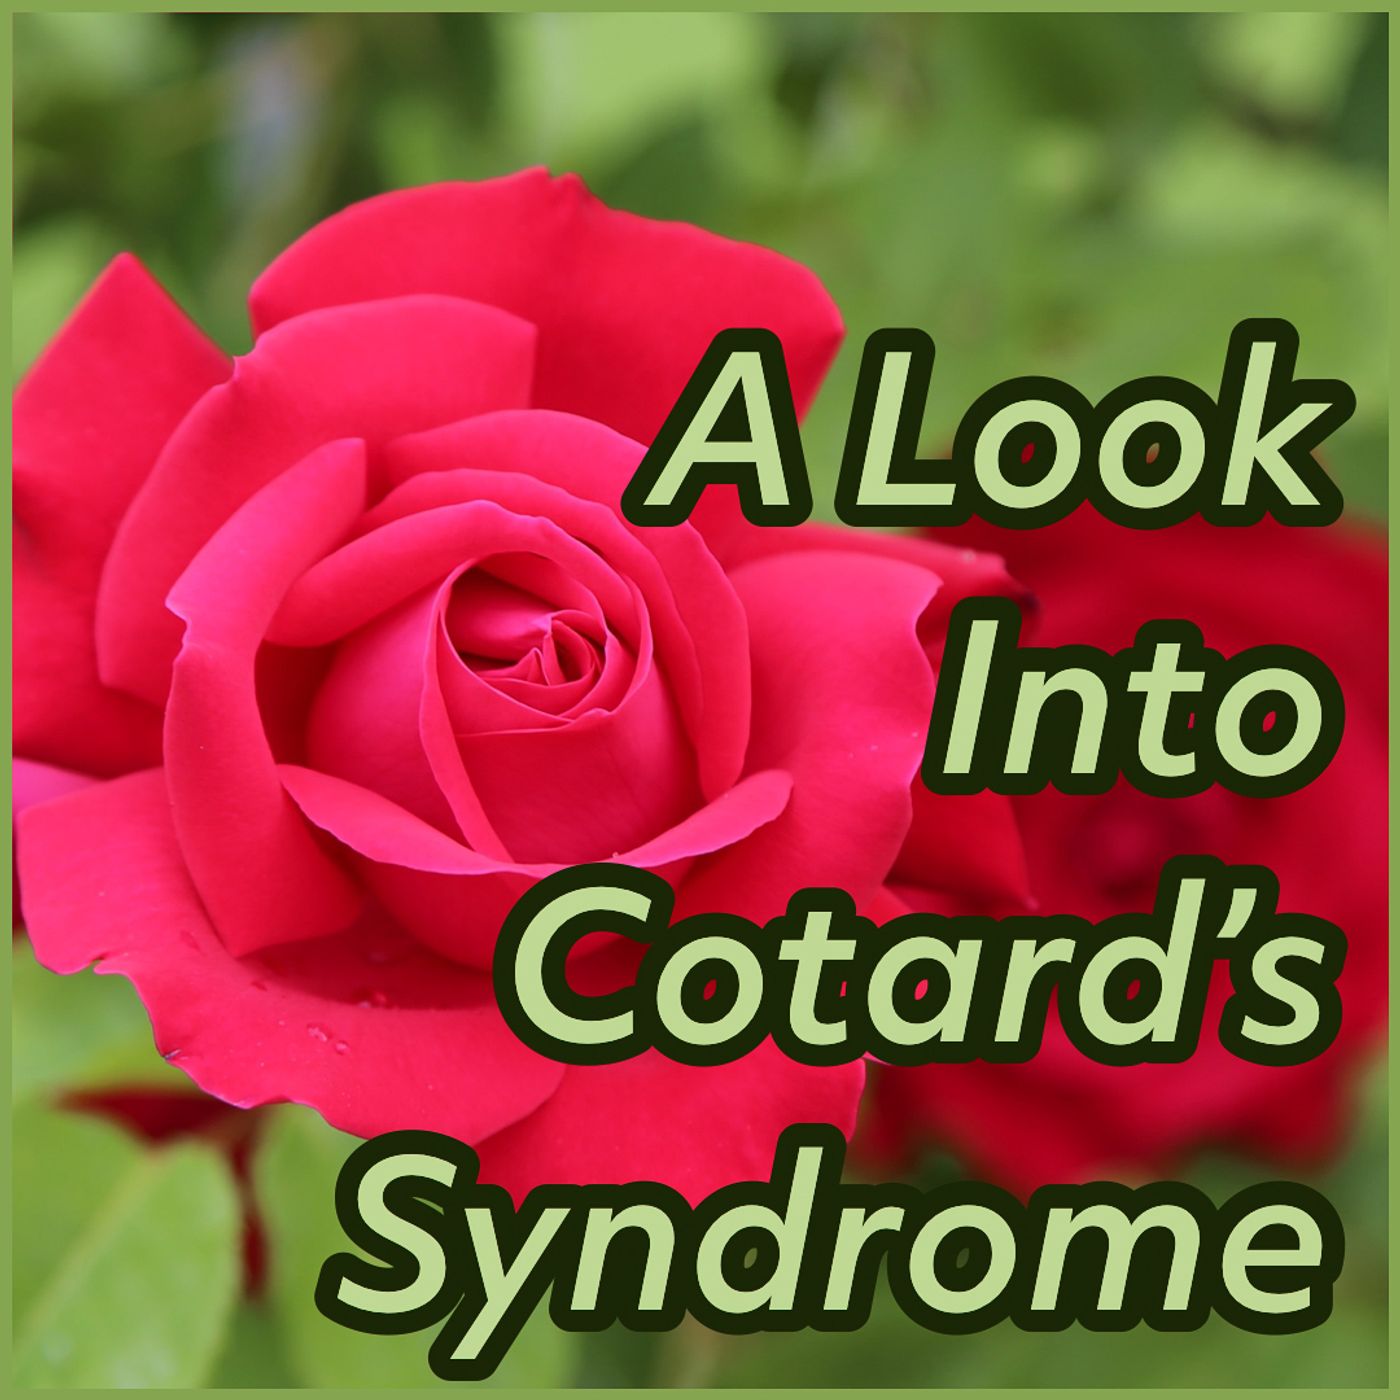 A Look Into Cotard's Syndrome